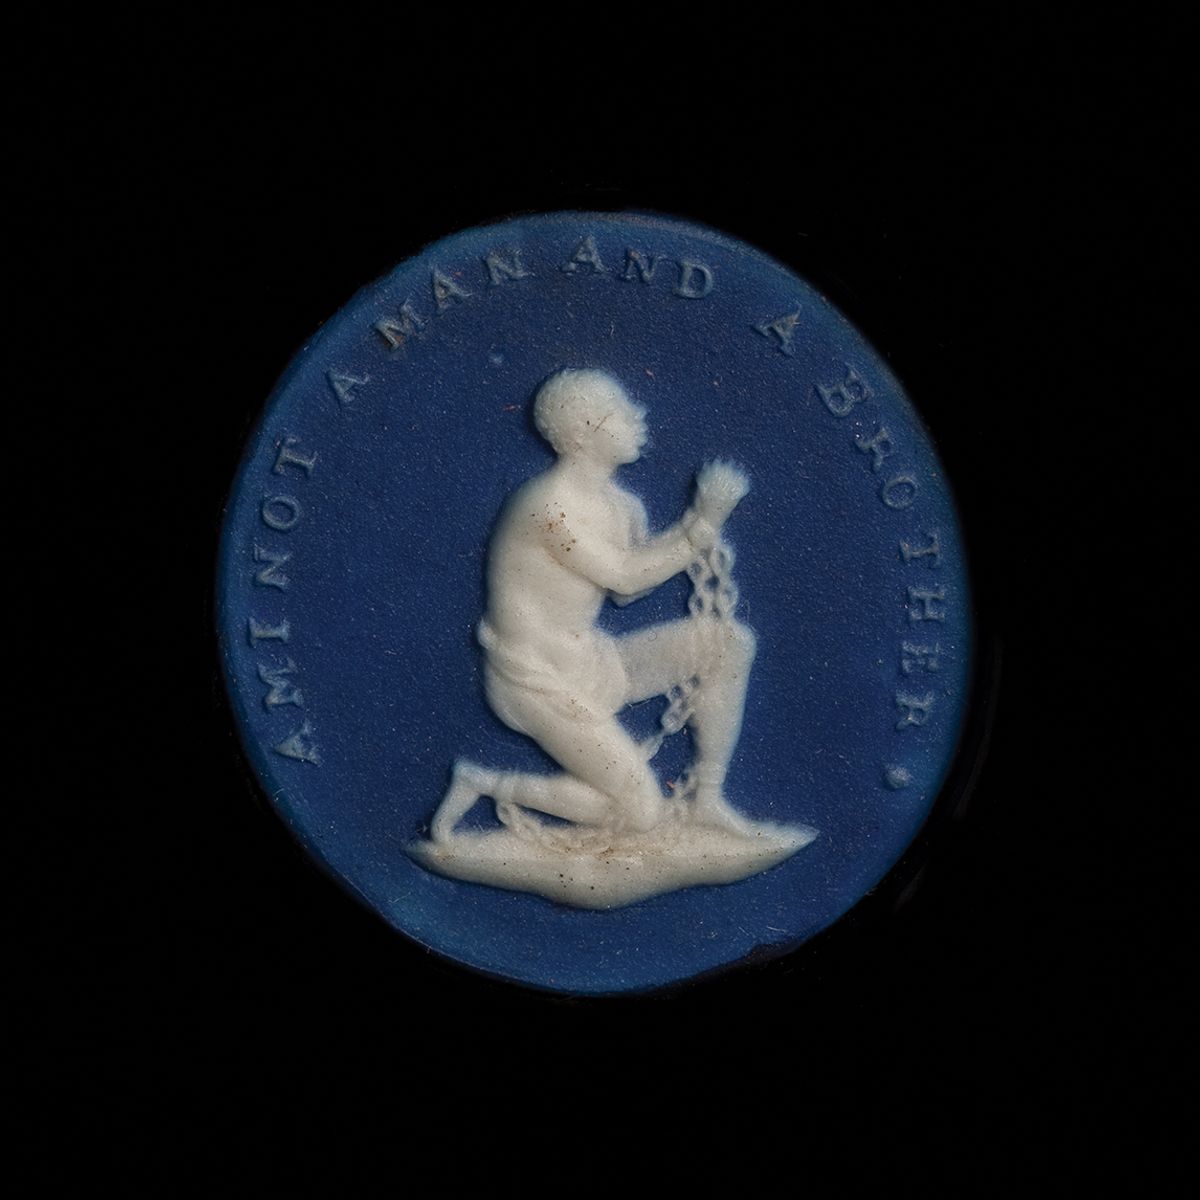 An anti-slavery medallion (around 1787) from the American Philosophical Society, Philadelphia, attributed to Wedgwood and part of the campaign against the transatlantic slave trade
American Philosophical Society, Philadelphia